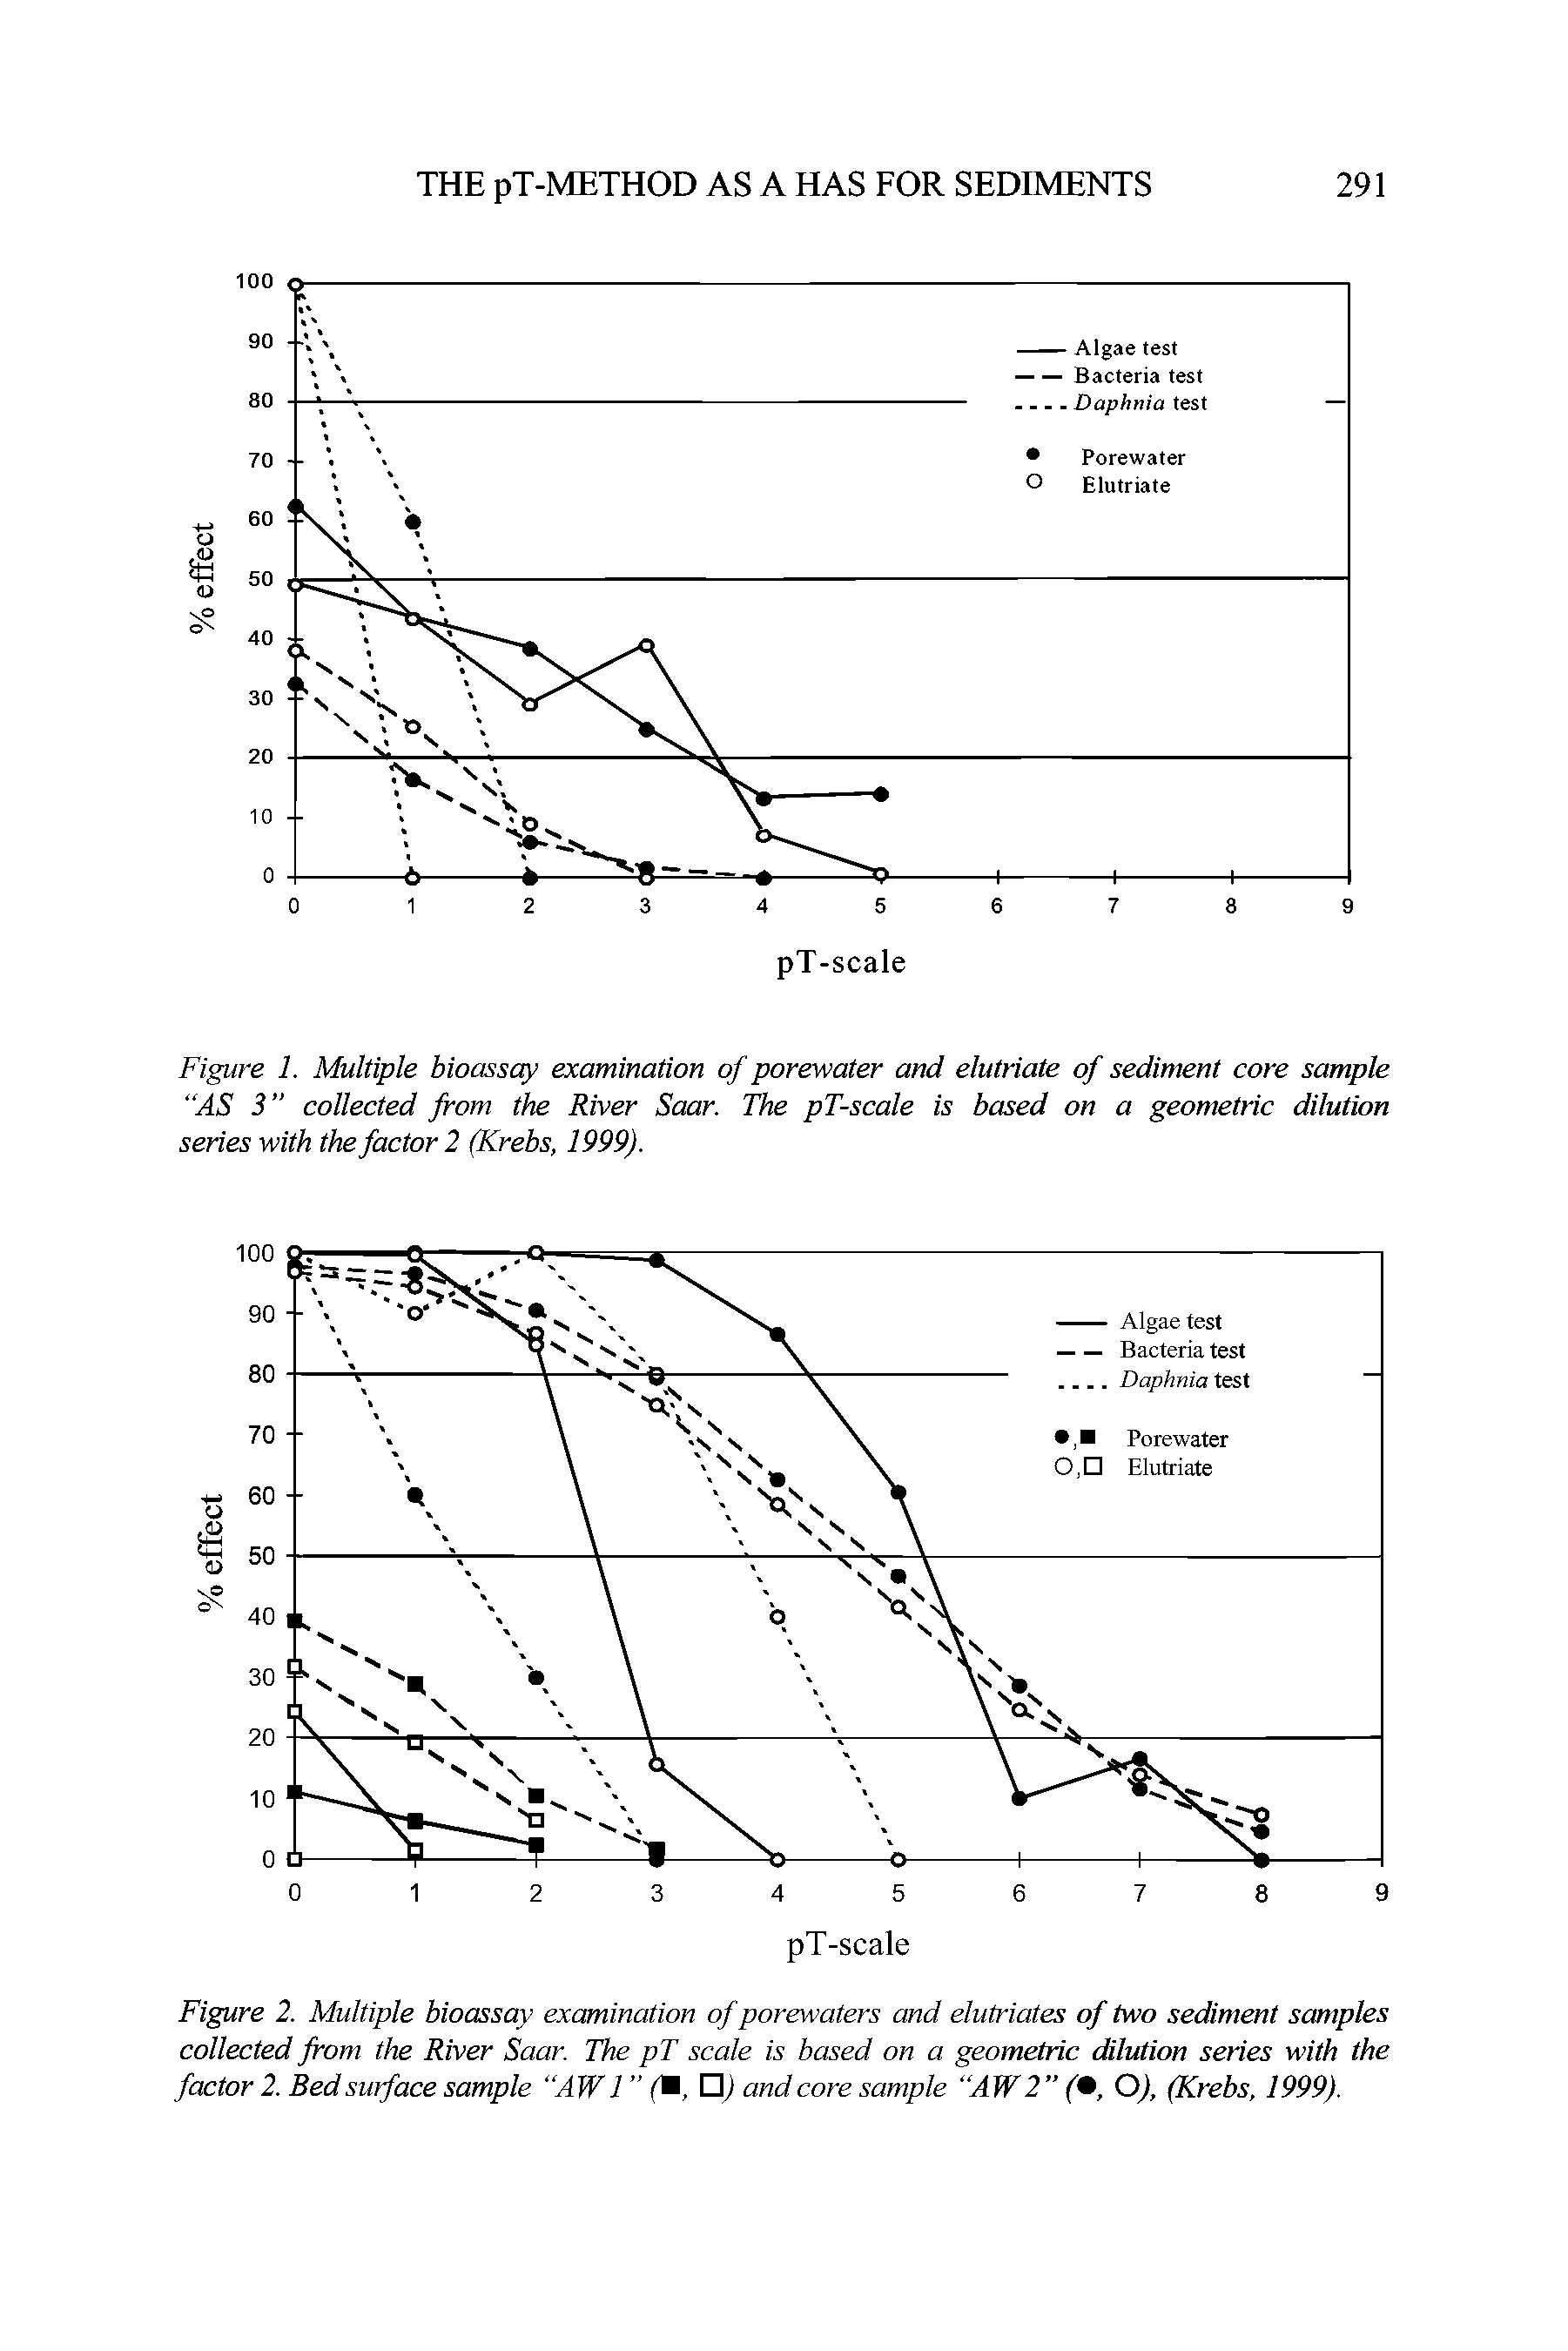 Figure 2. Multiple bioassay examination of porewaters and elutriates of two sediment samples collected from the River Saar. The pT scale is based on a geometric dilution series with the factor 2. Bed surface sample AW 1 ( , ) and core sample AW 2 (, O), (Krebs, 1999).